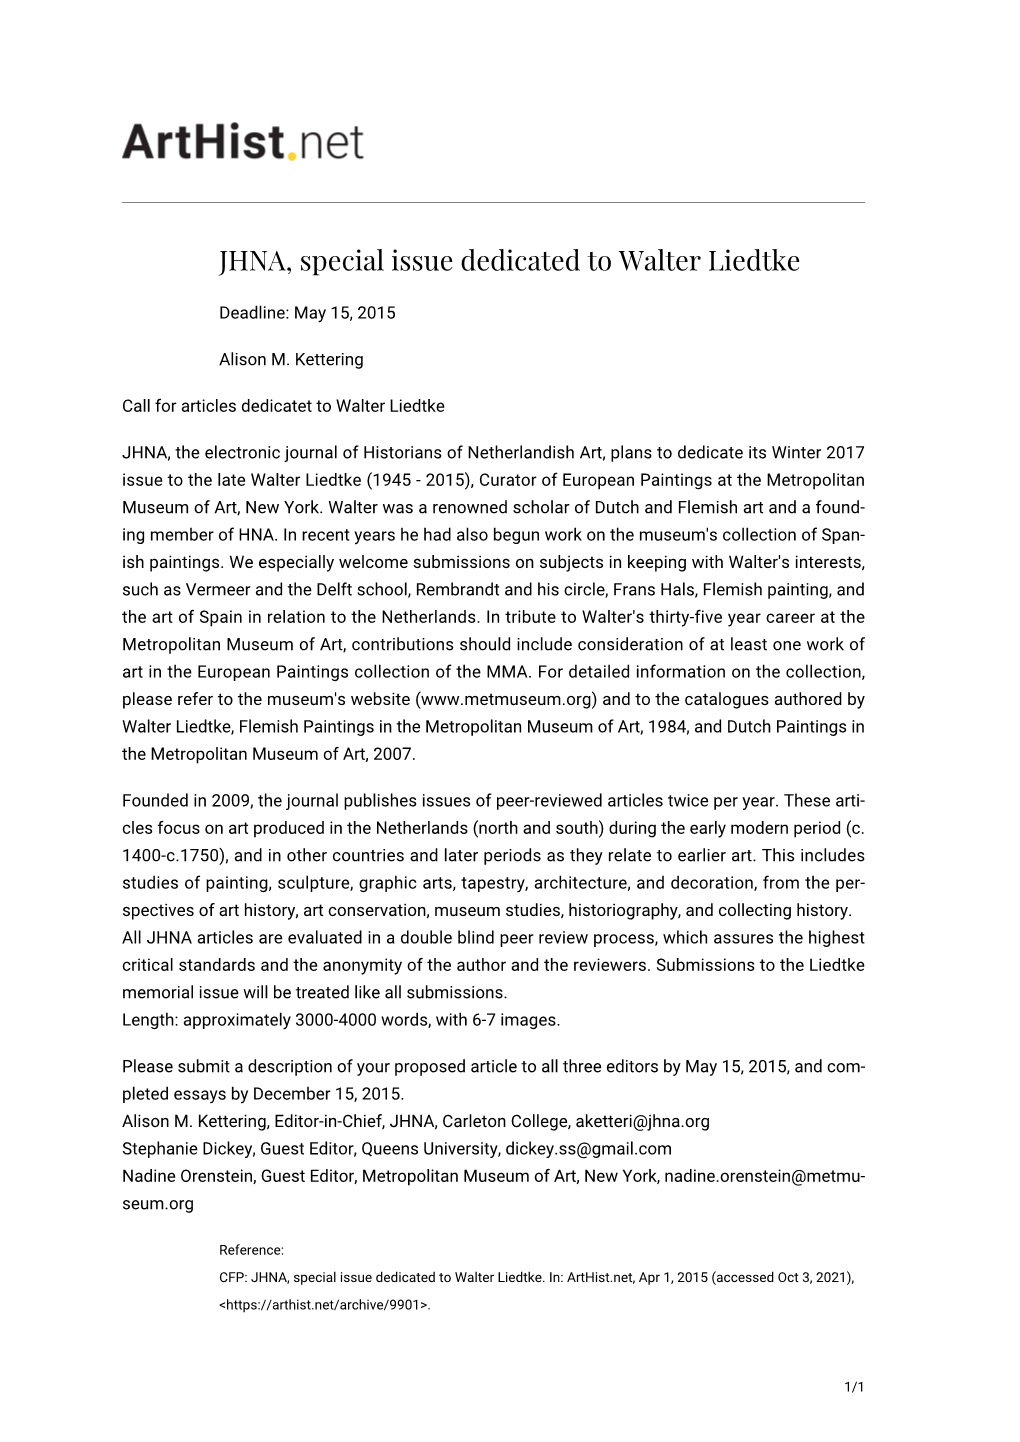 JHNA, Special Issue Dedicated to Walter Liedtke